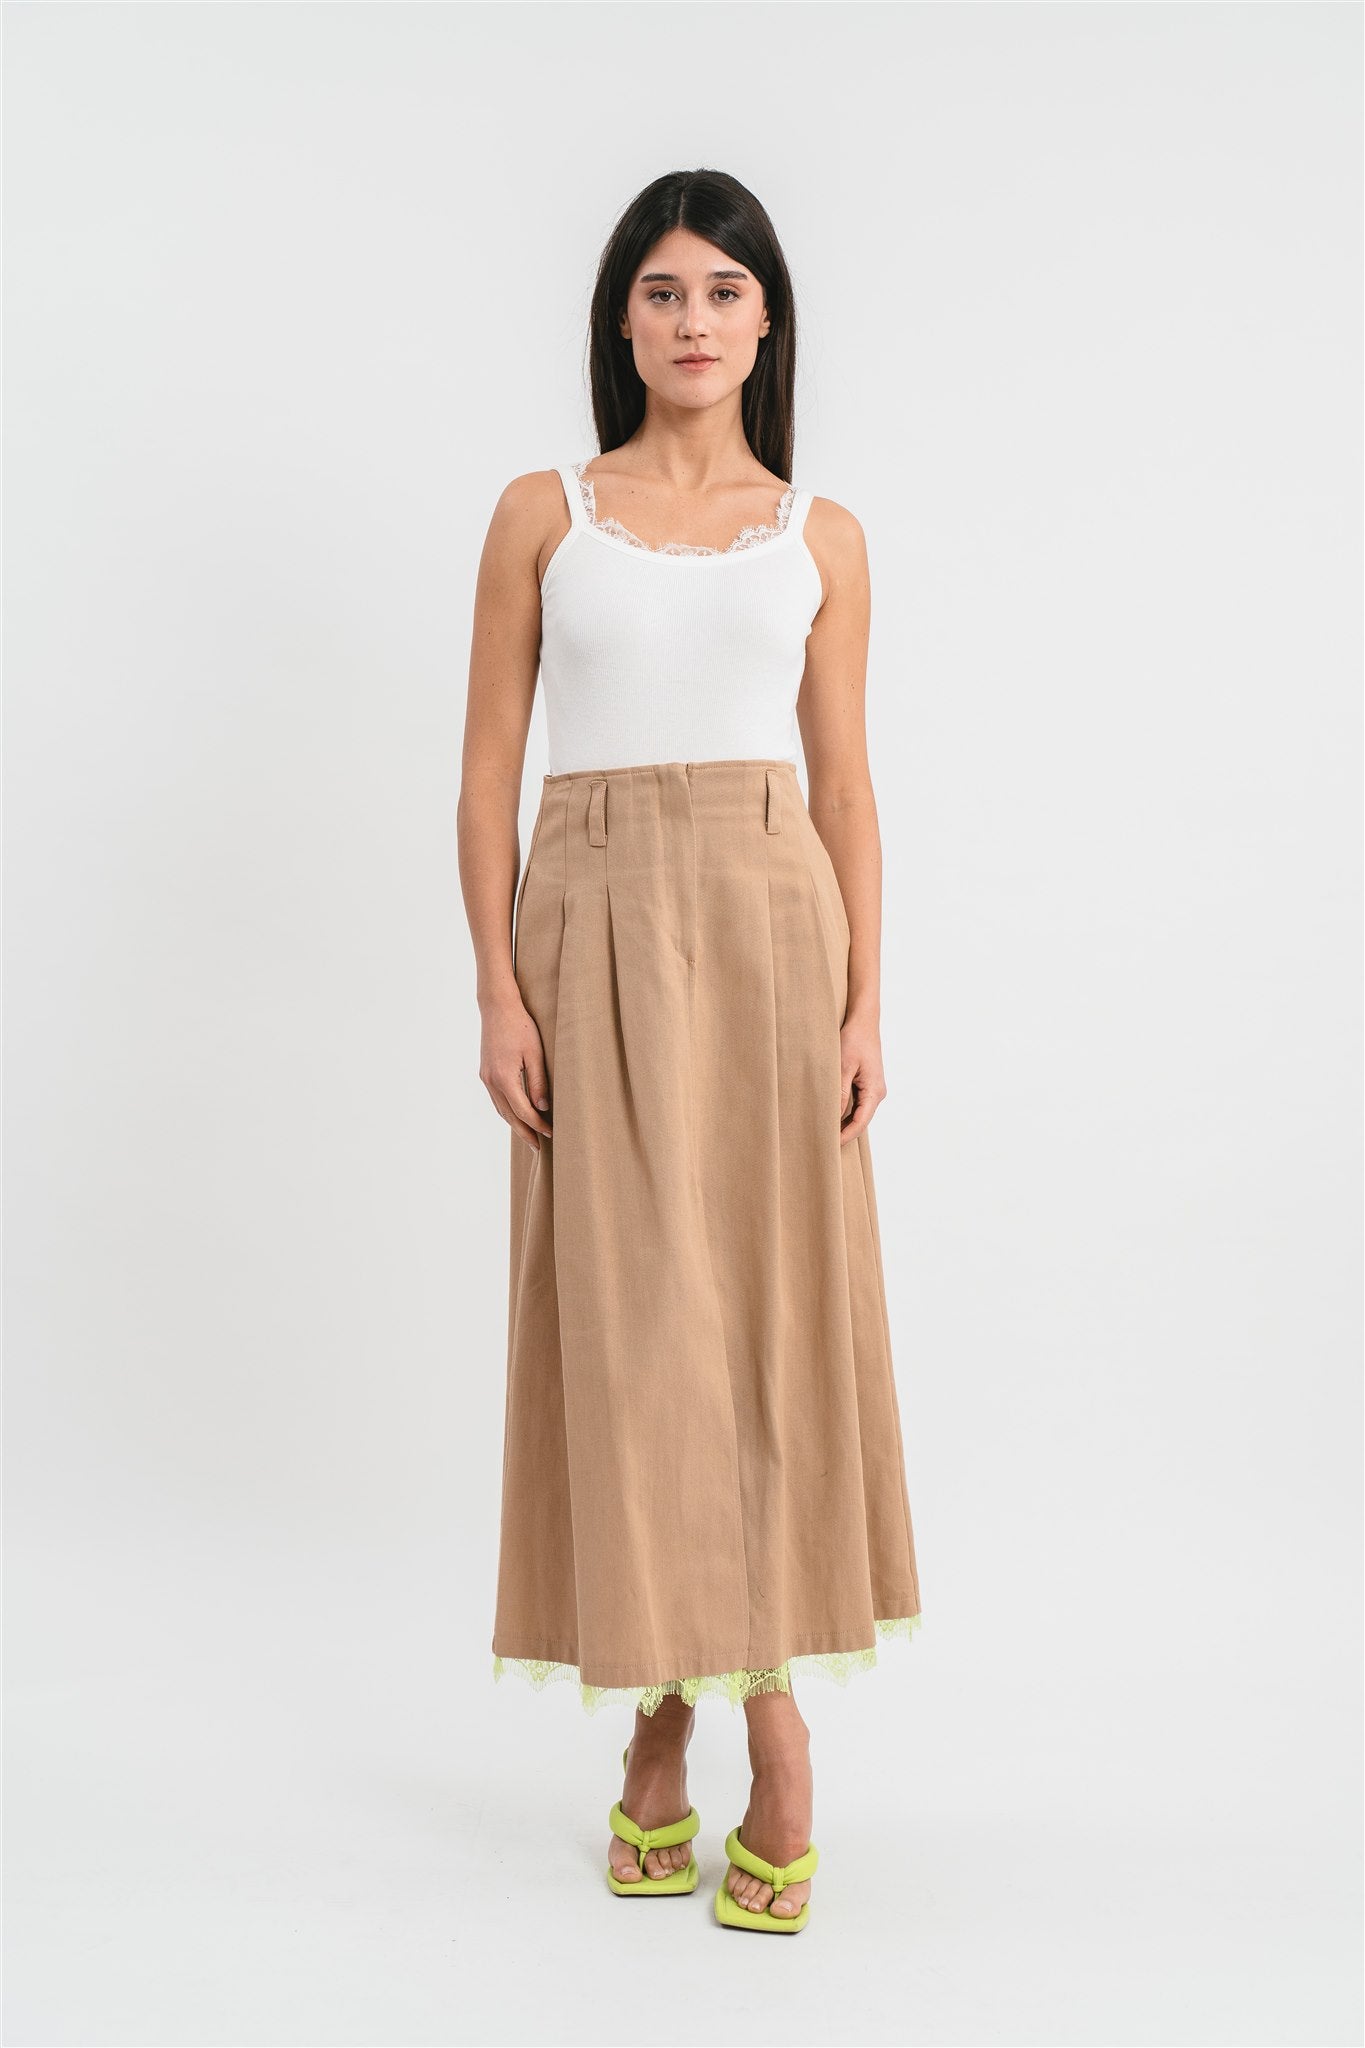 Long skirt with slit and contrasting lace details